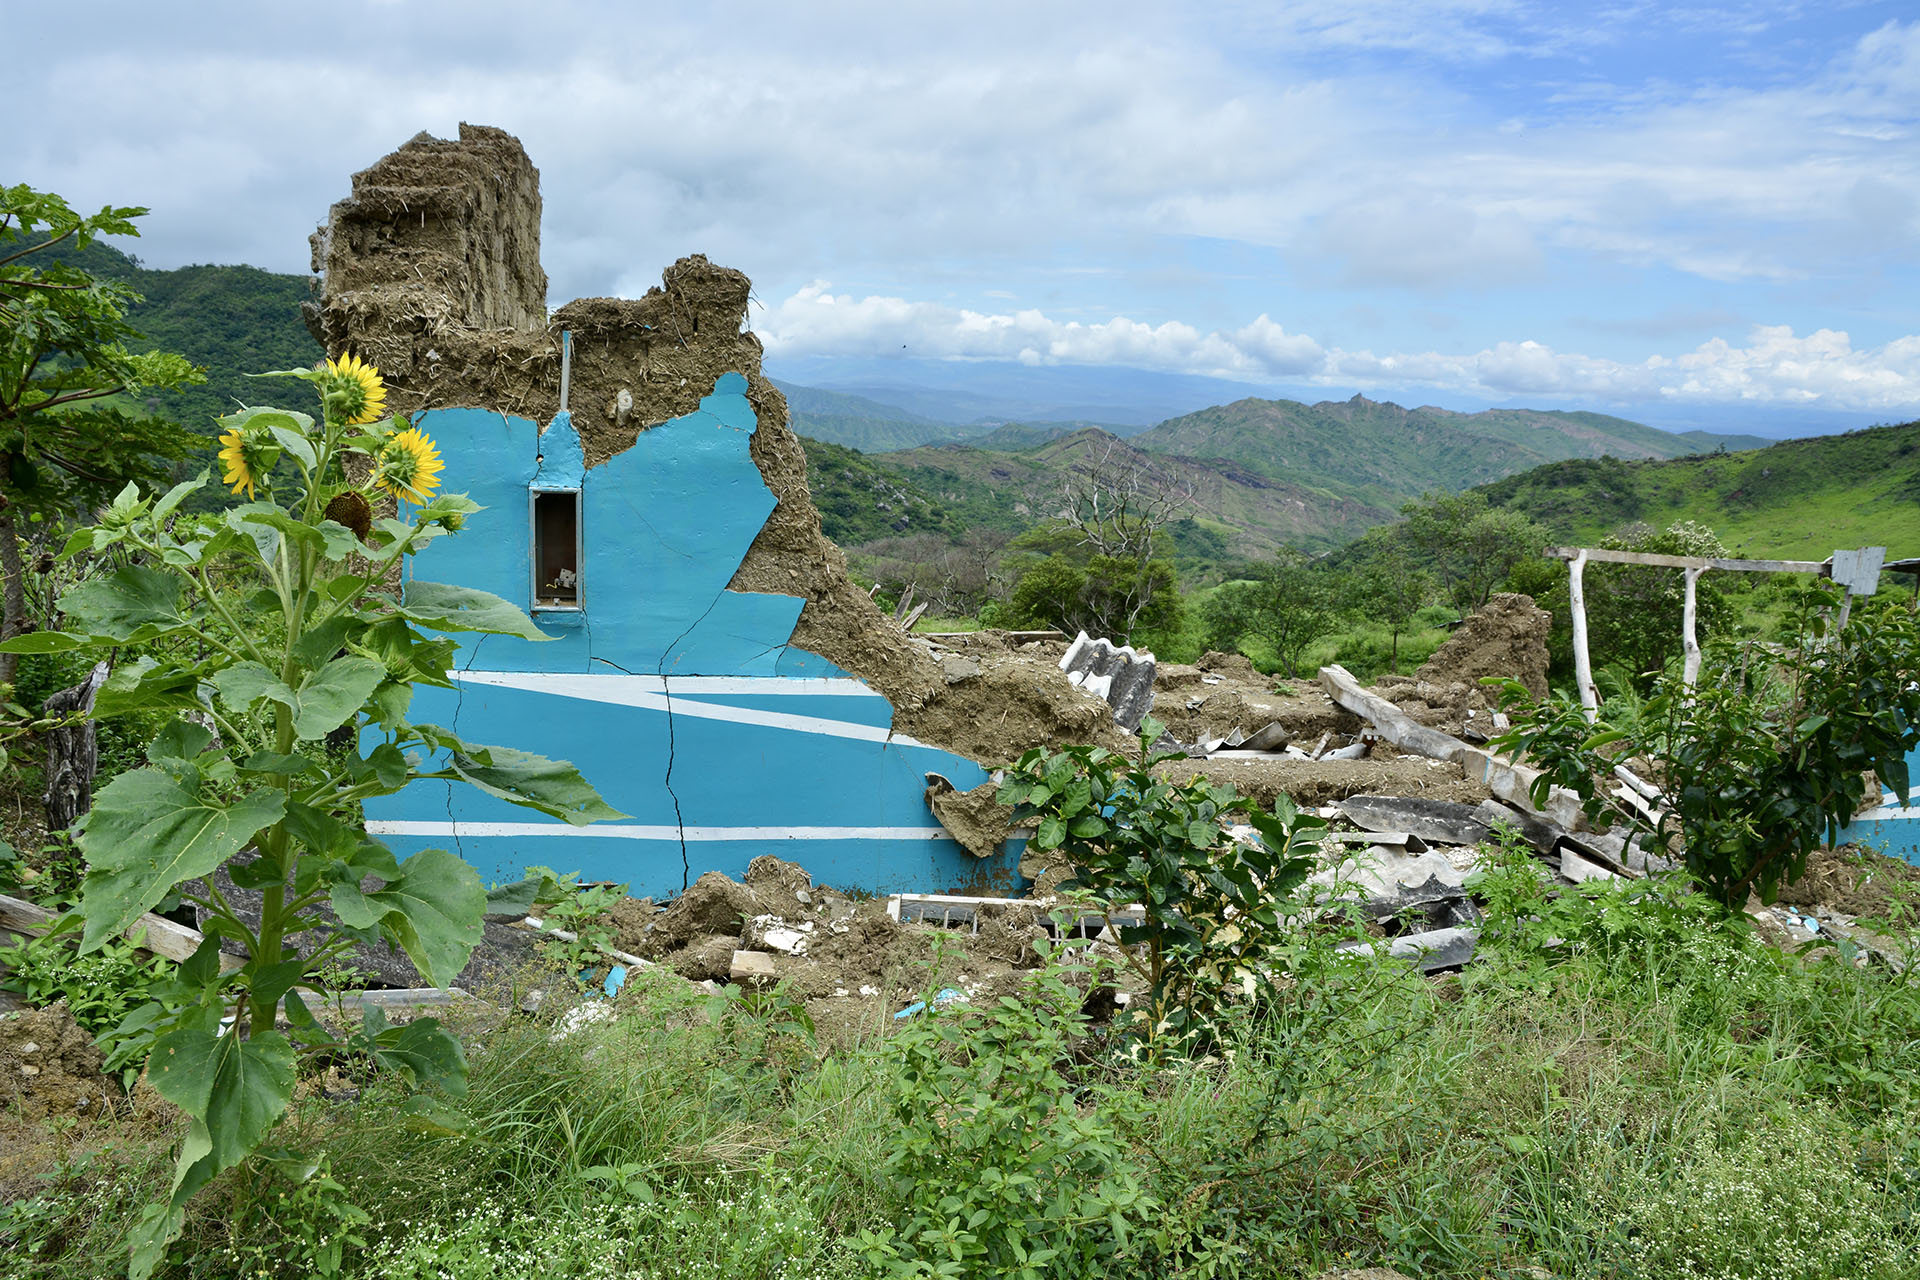 Casualties were limited following a November earthquake and months of landslides that followed in Peru’s Amazonas region, but most residents in villages like San Isidro lost their homes and livelihoods.